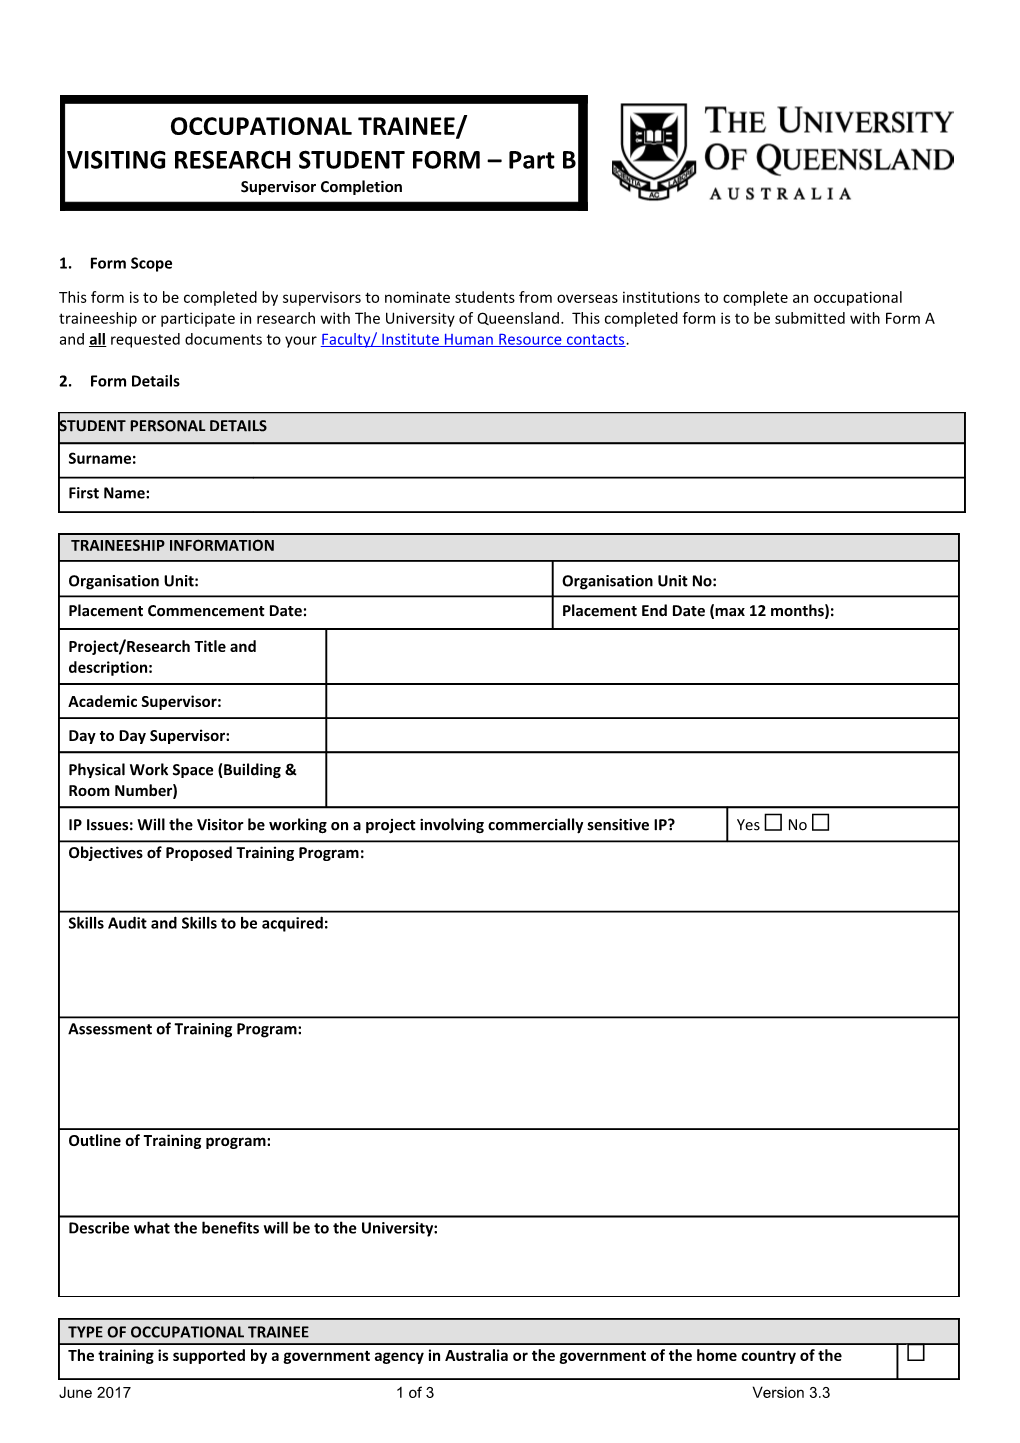 Unpaid Appointment Form